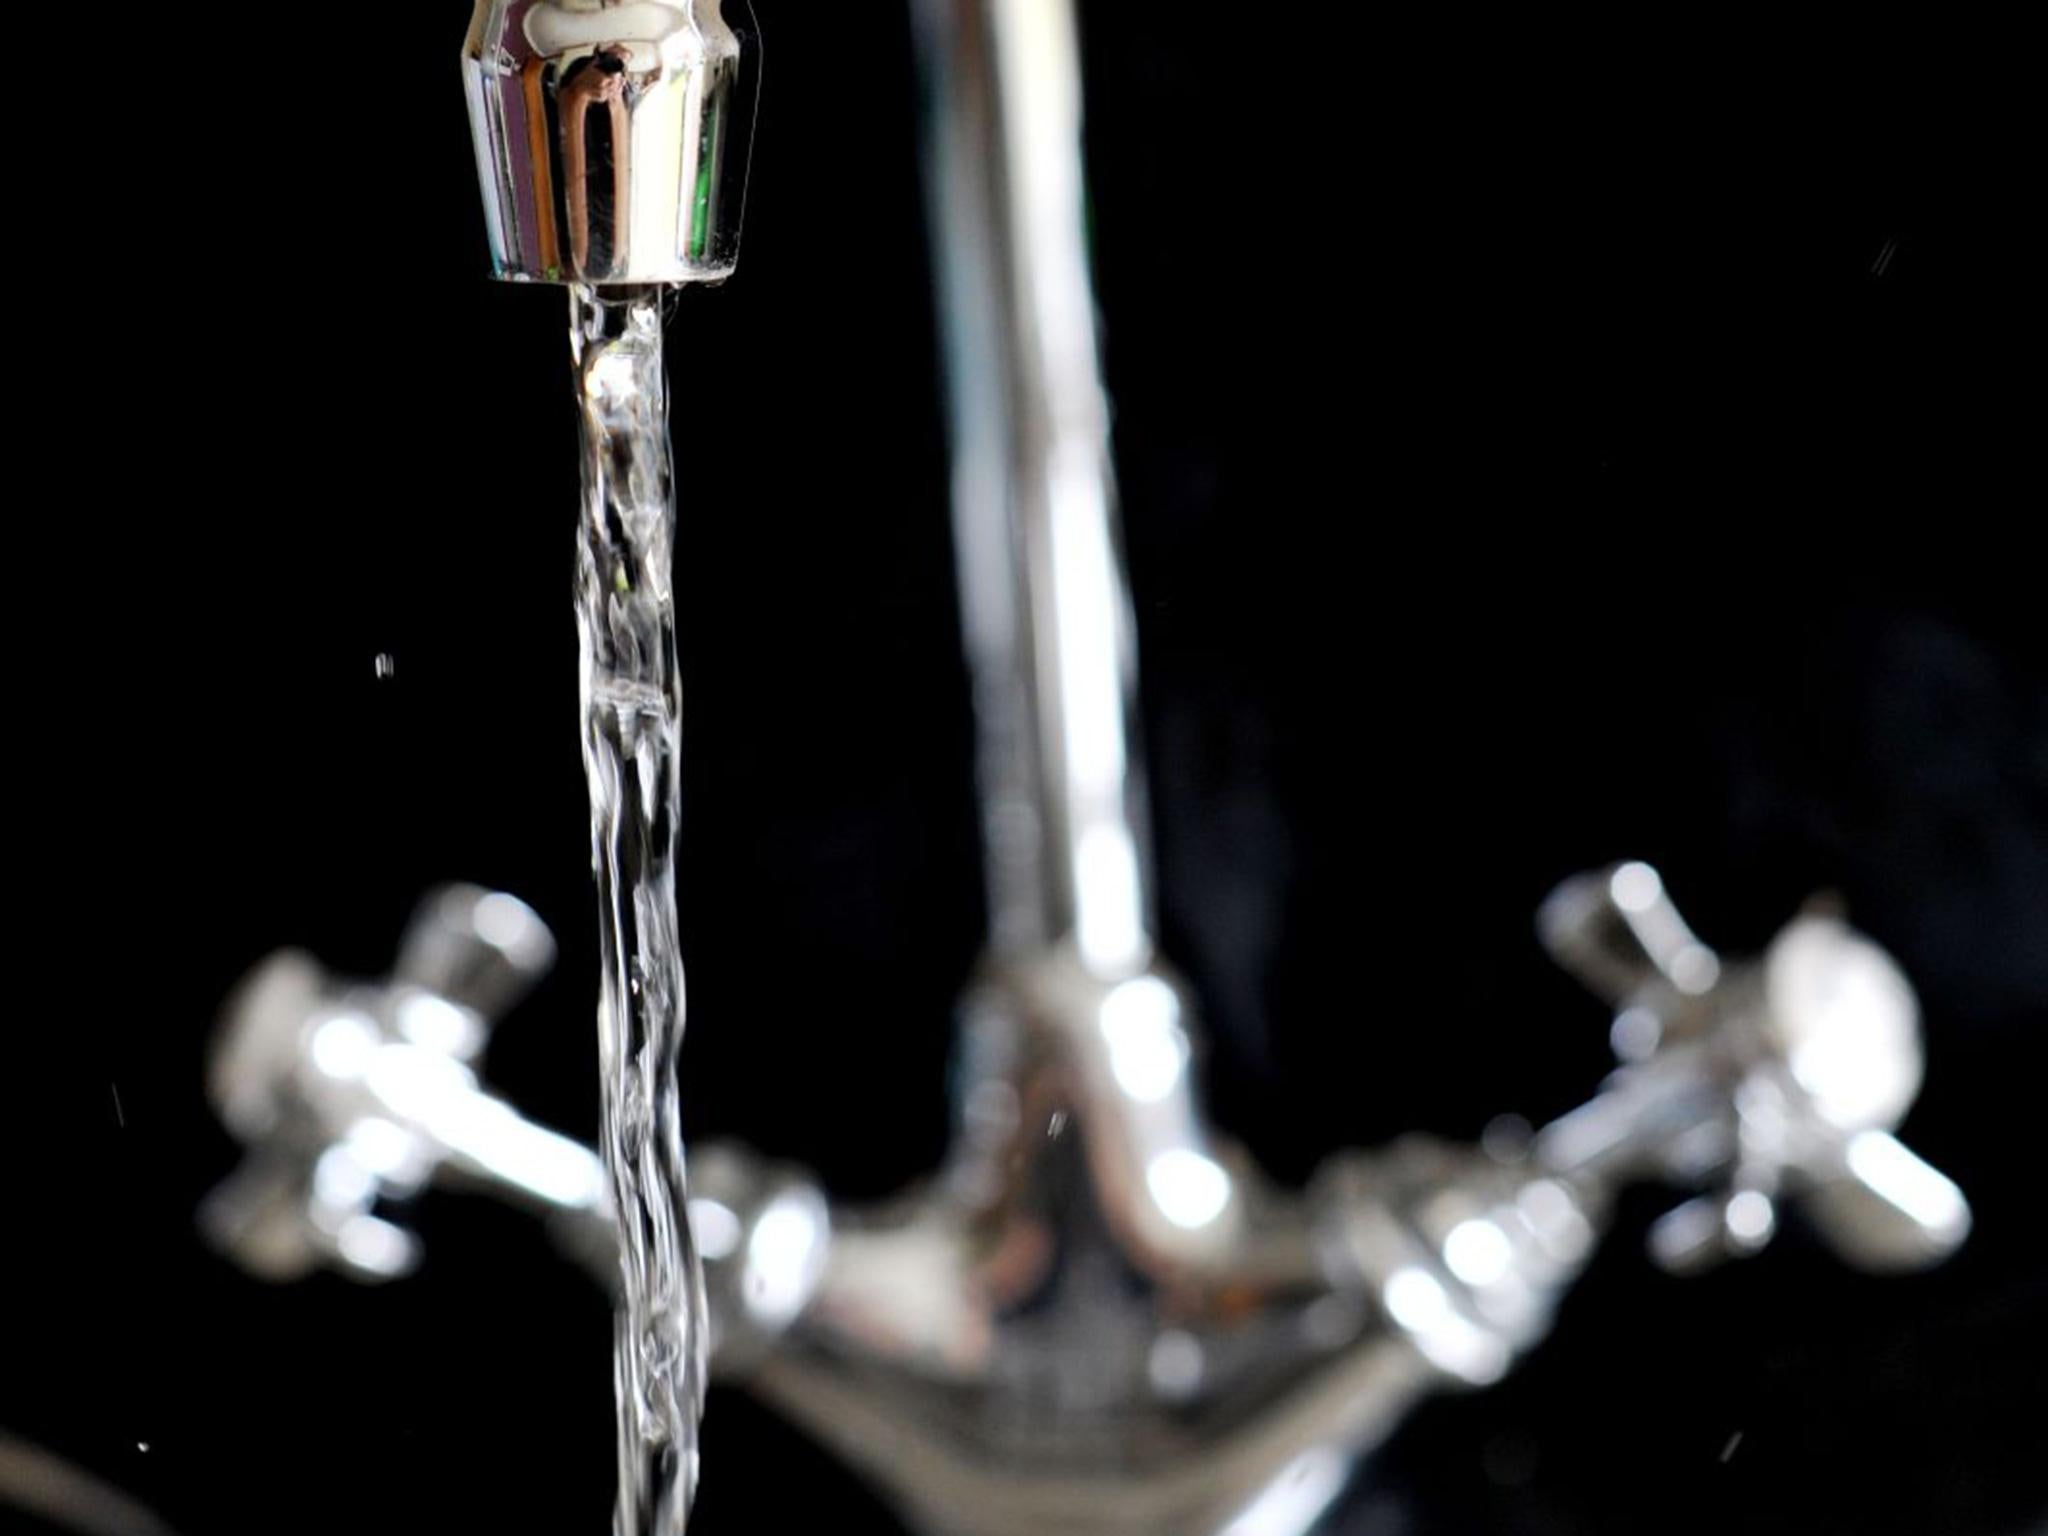 Dr Marc Edwards said drinking Chicago tap water is like 'Russian roulette'